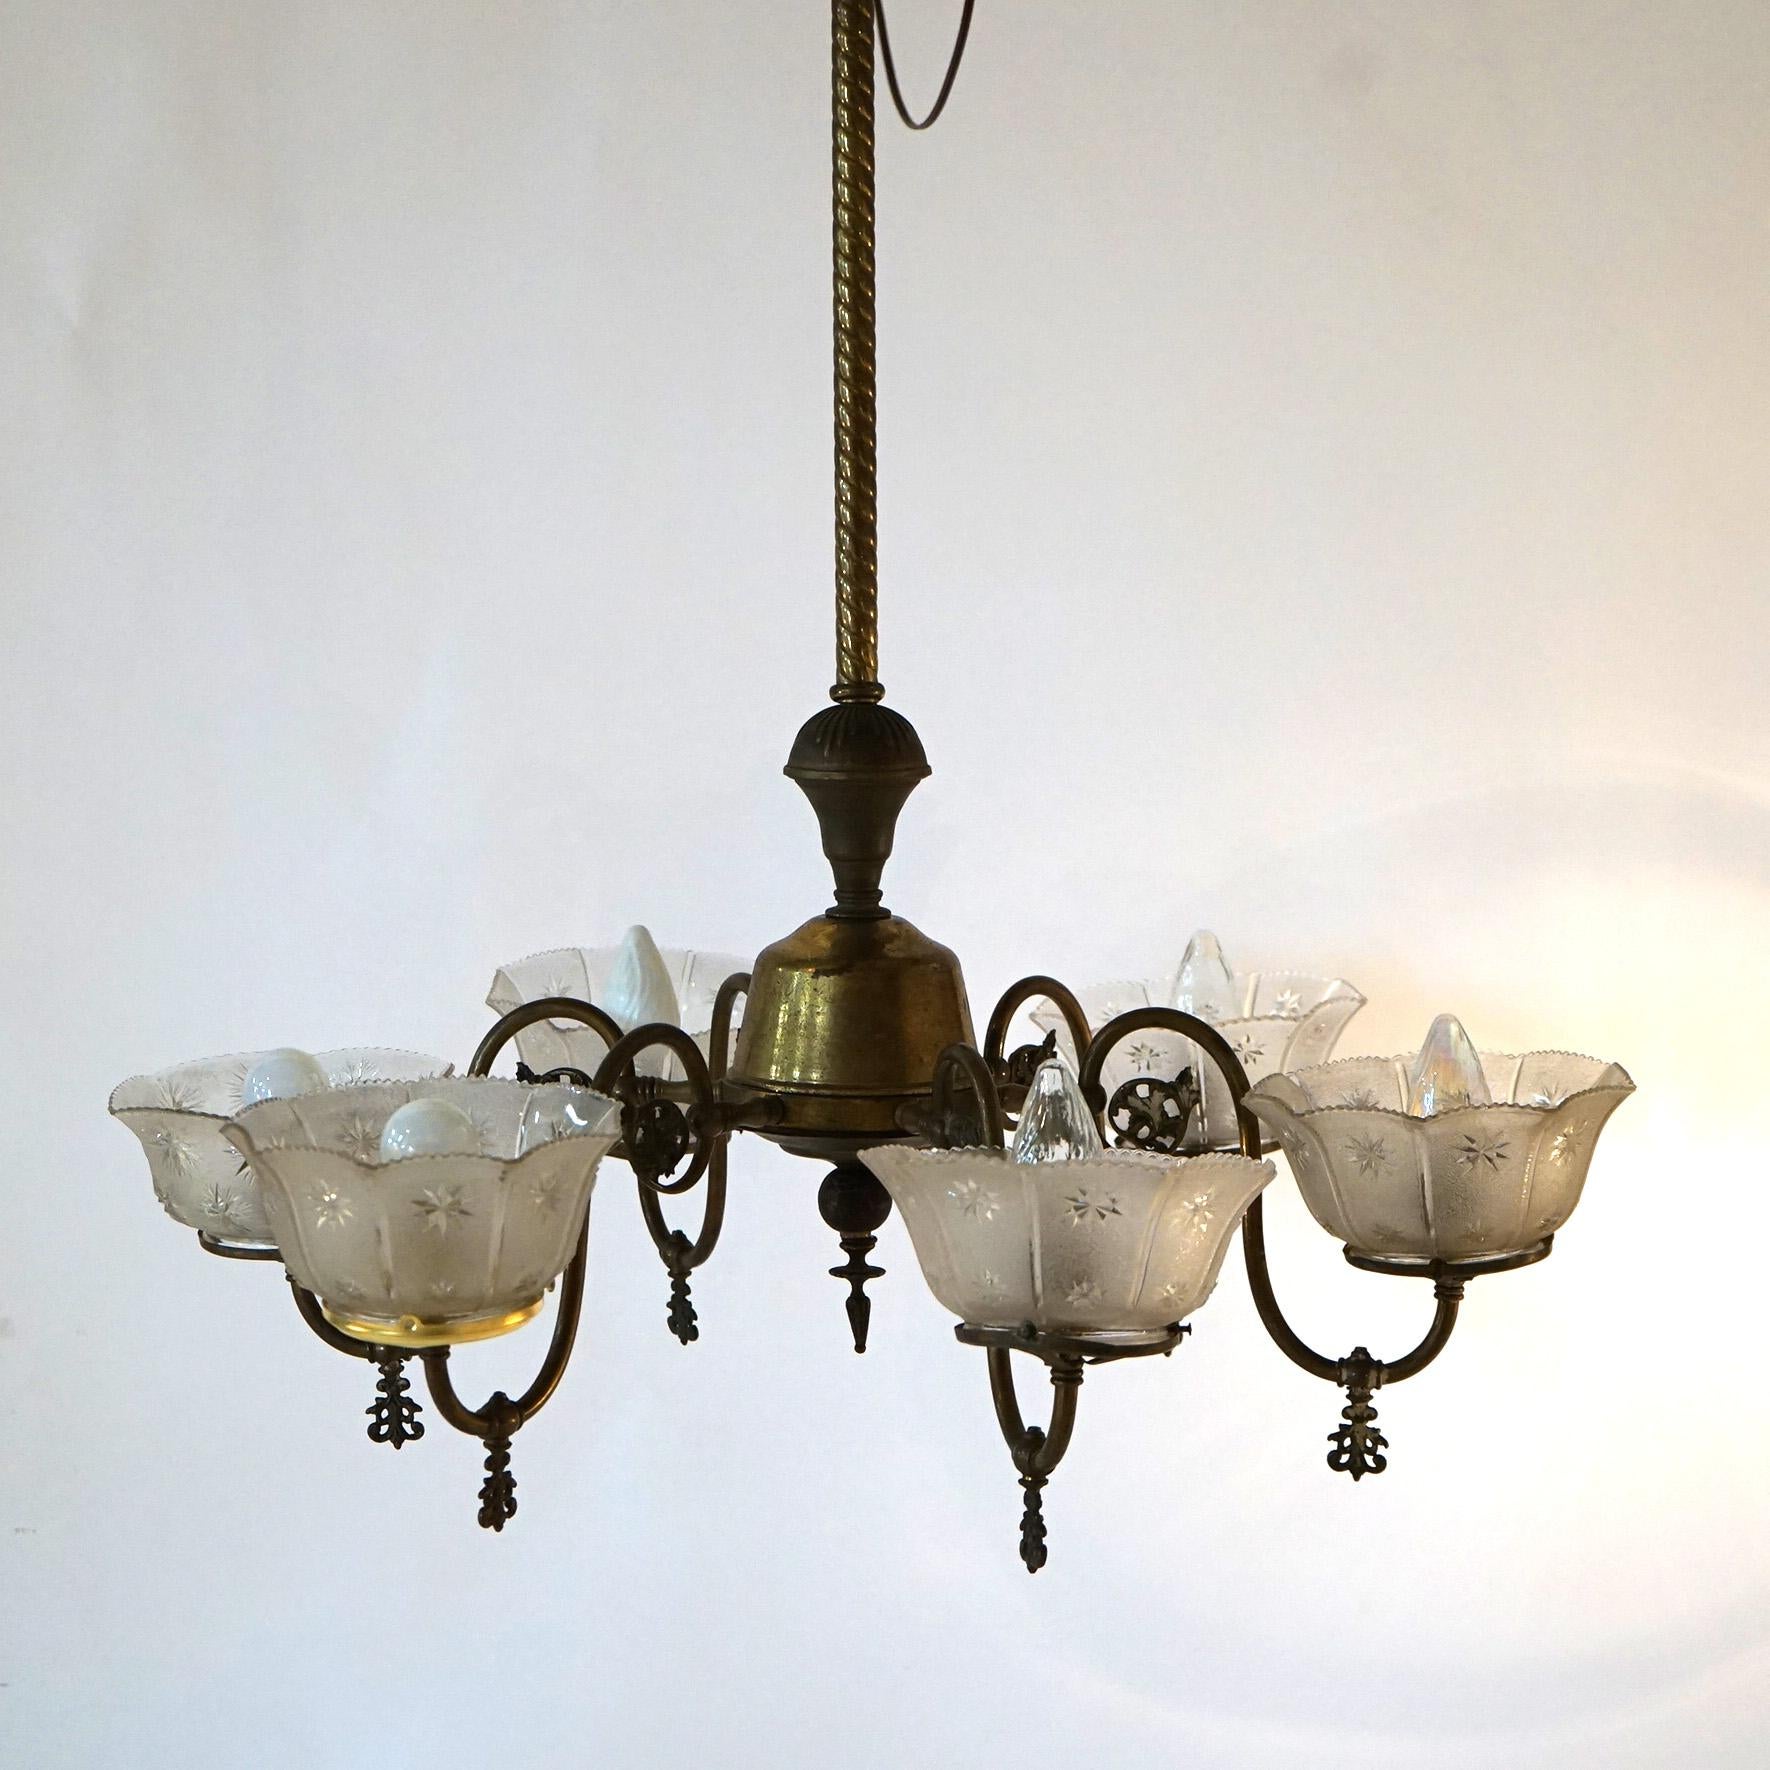 Antique Six Arm Brass Gas Chandelier with Glass Shades, Electrified, Circa 1890 11